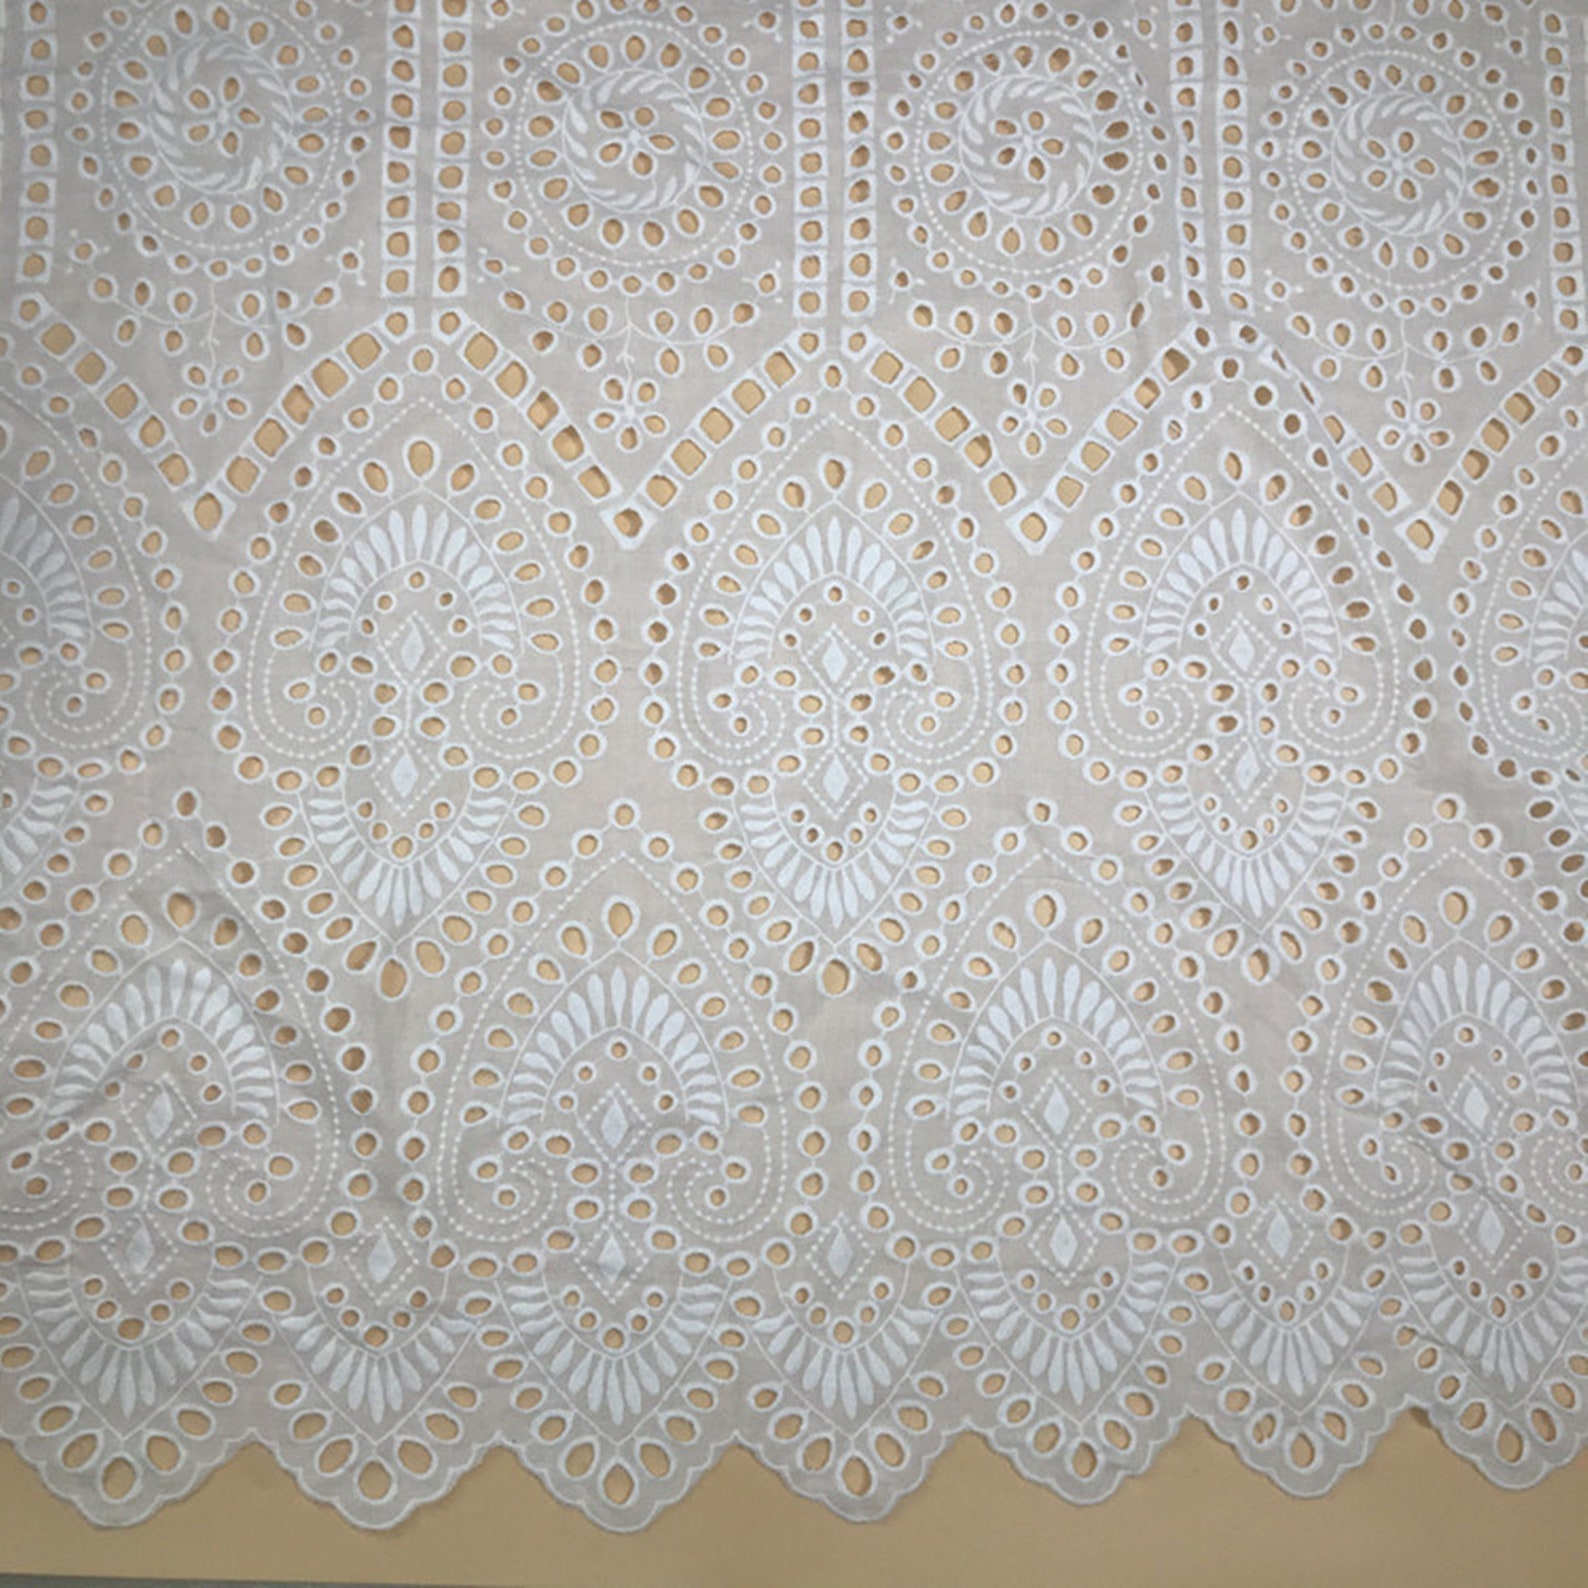 Retro Eyelet Cotton Lace Fabric Off white Cotton Fabric with | Etsy